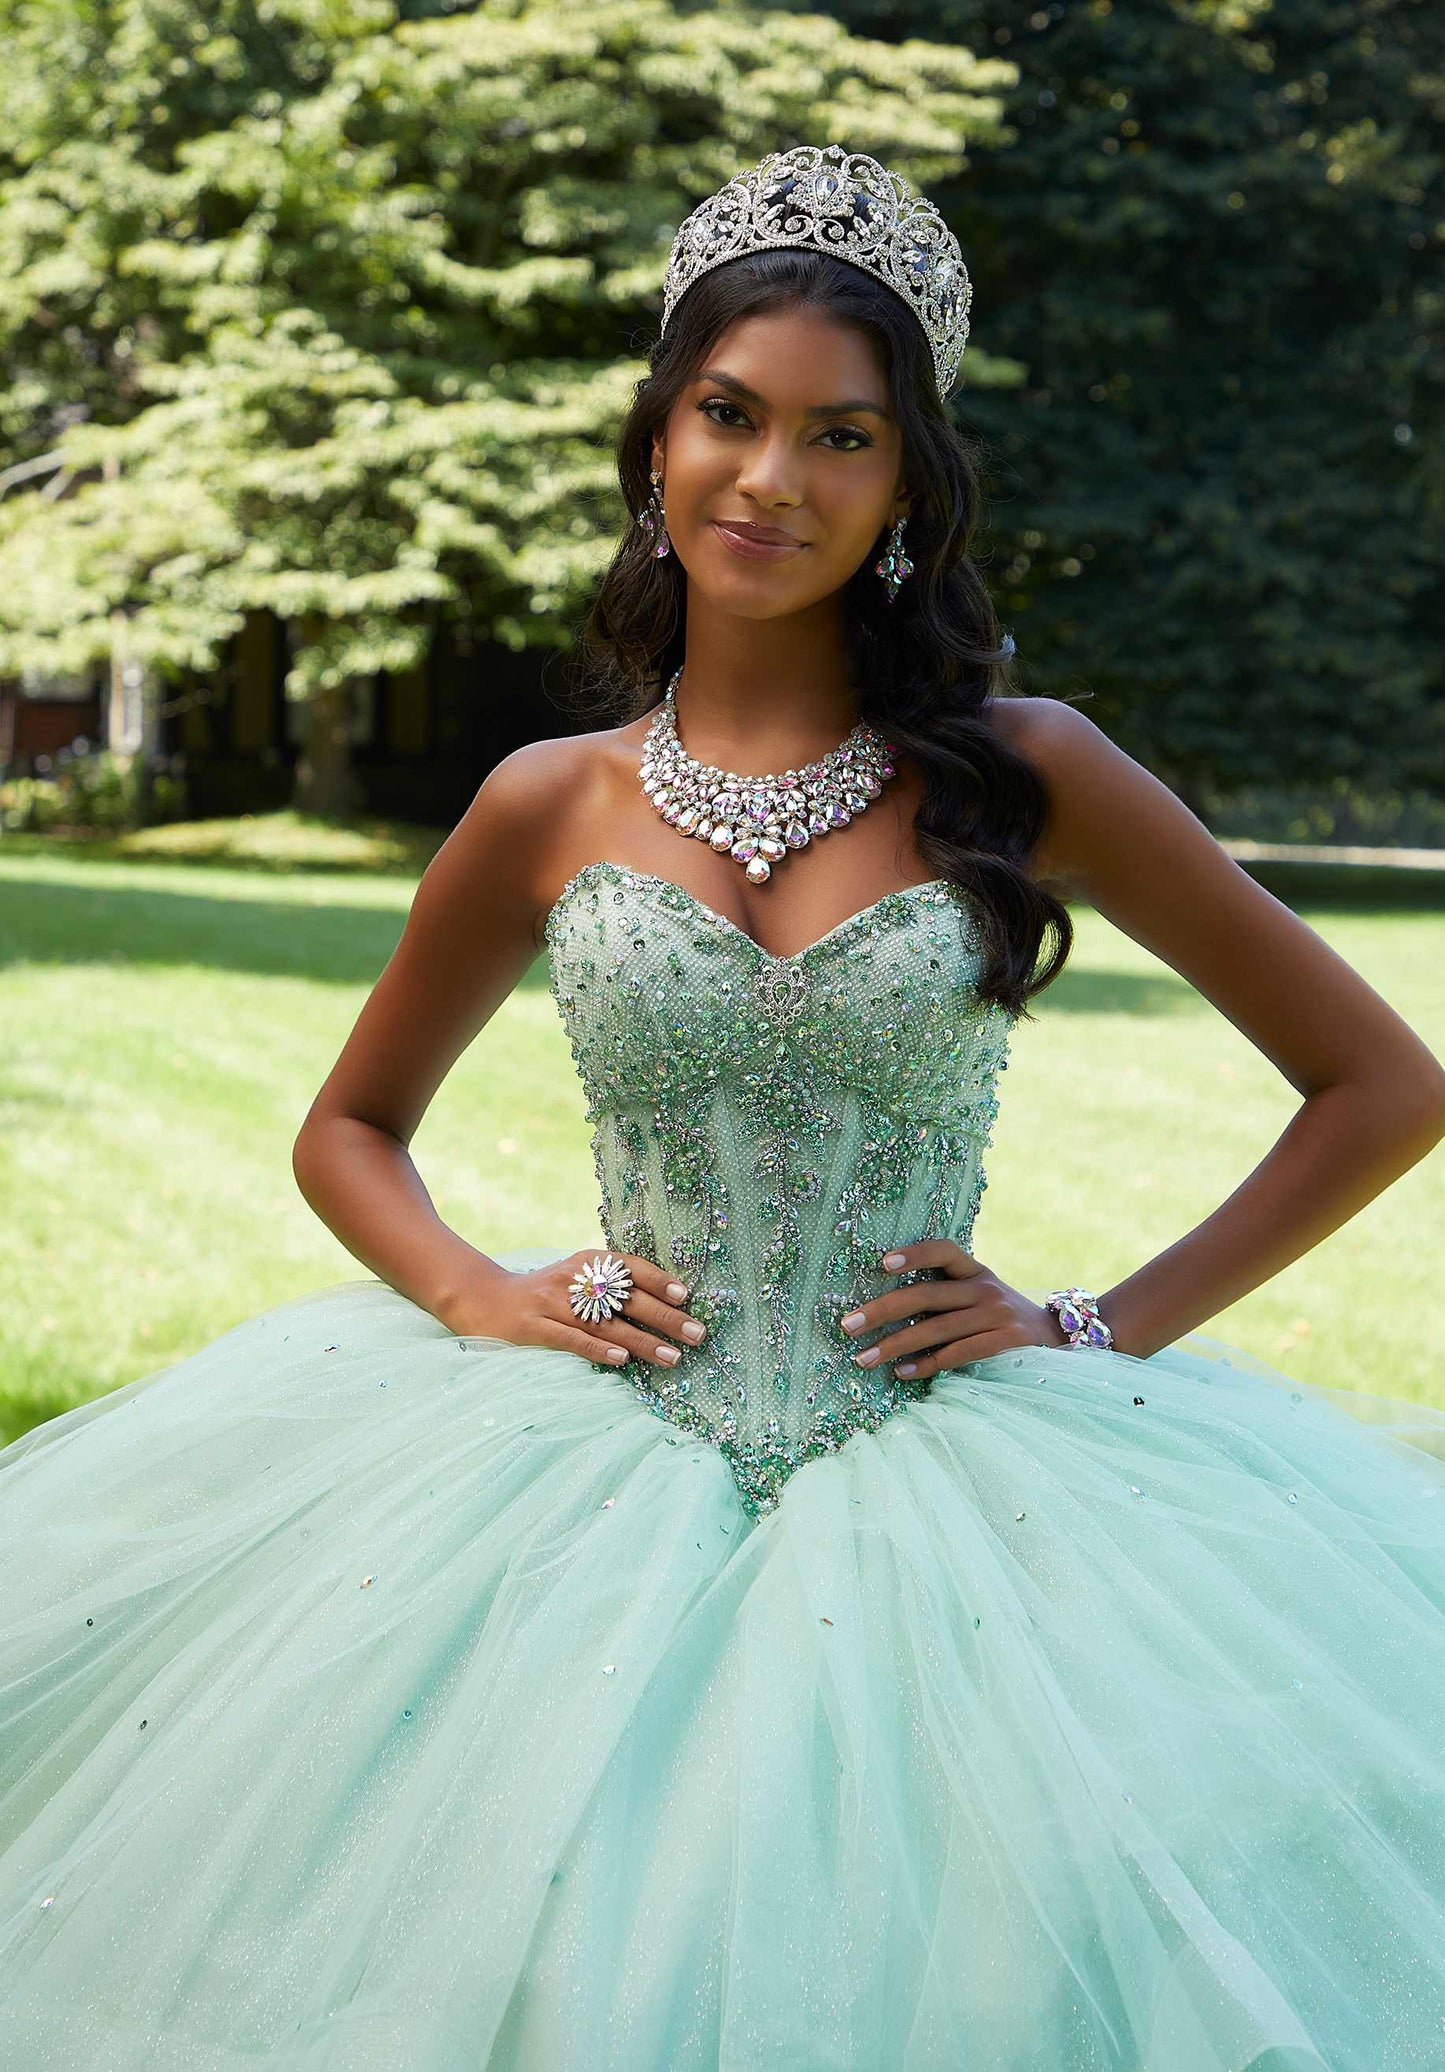 11870 | Rhinestone and Crystal Beading on a Tulle Over Sparkle Quinceanera Dress